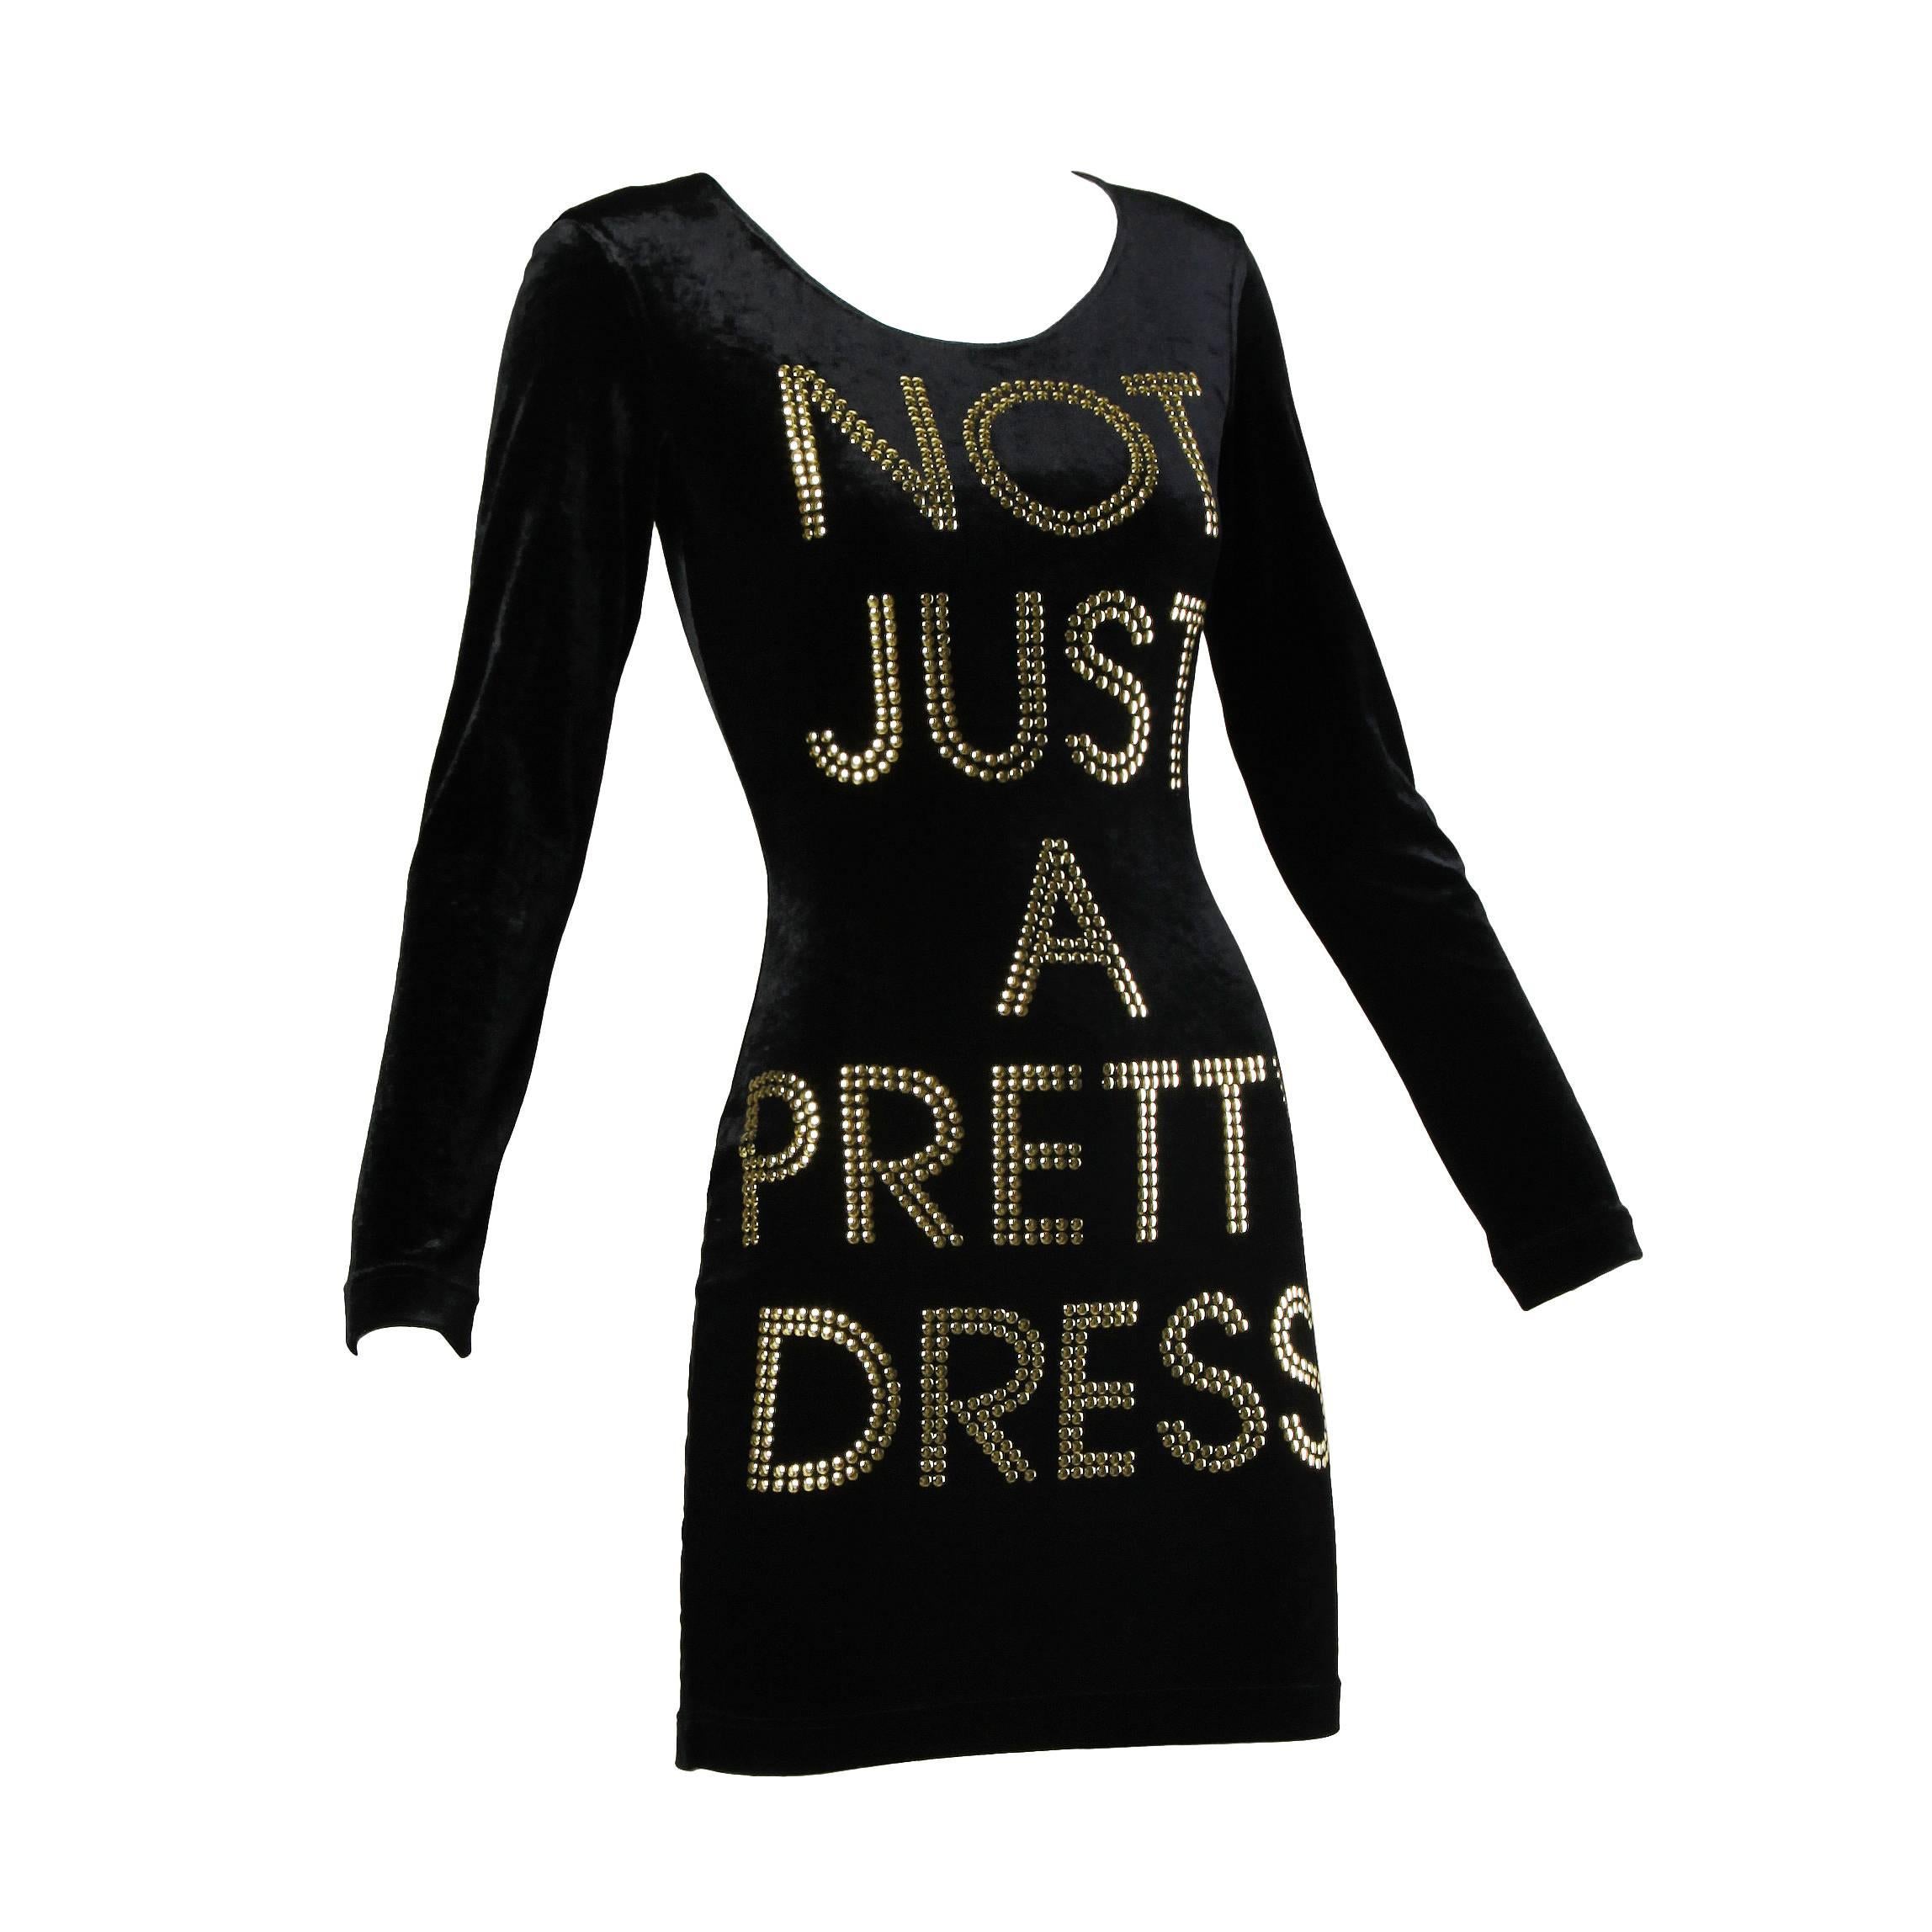 Moschino "NOT JUST A PRETTY DRESS" as worn by La La Anthony For Sale